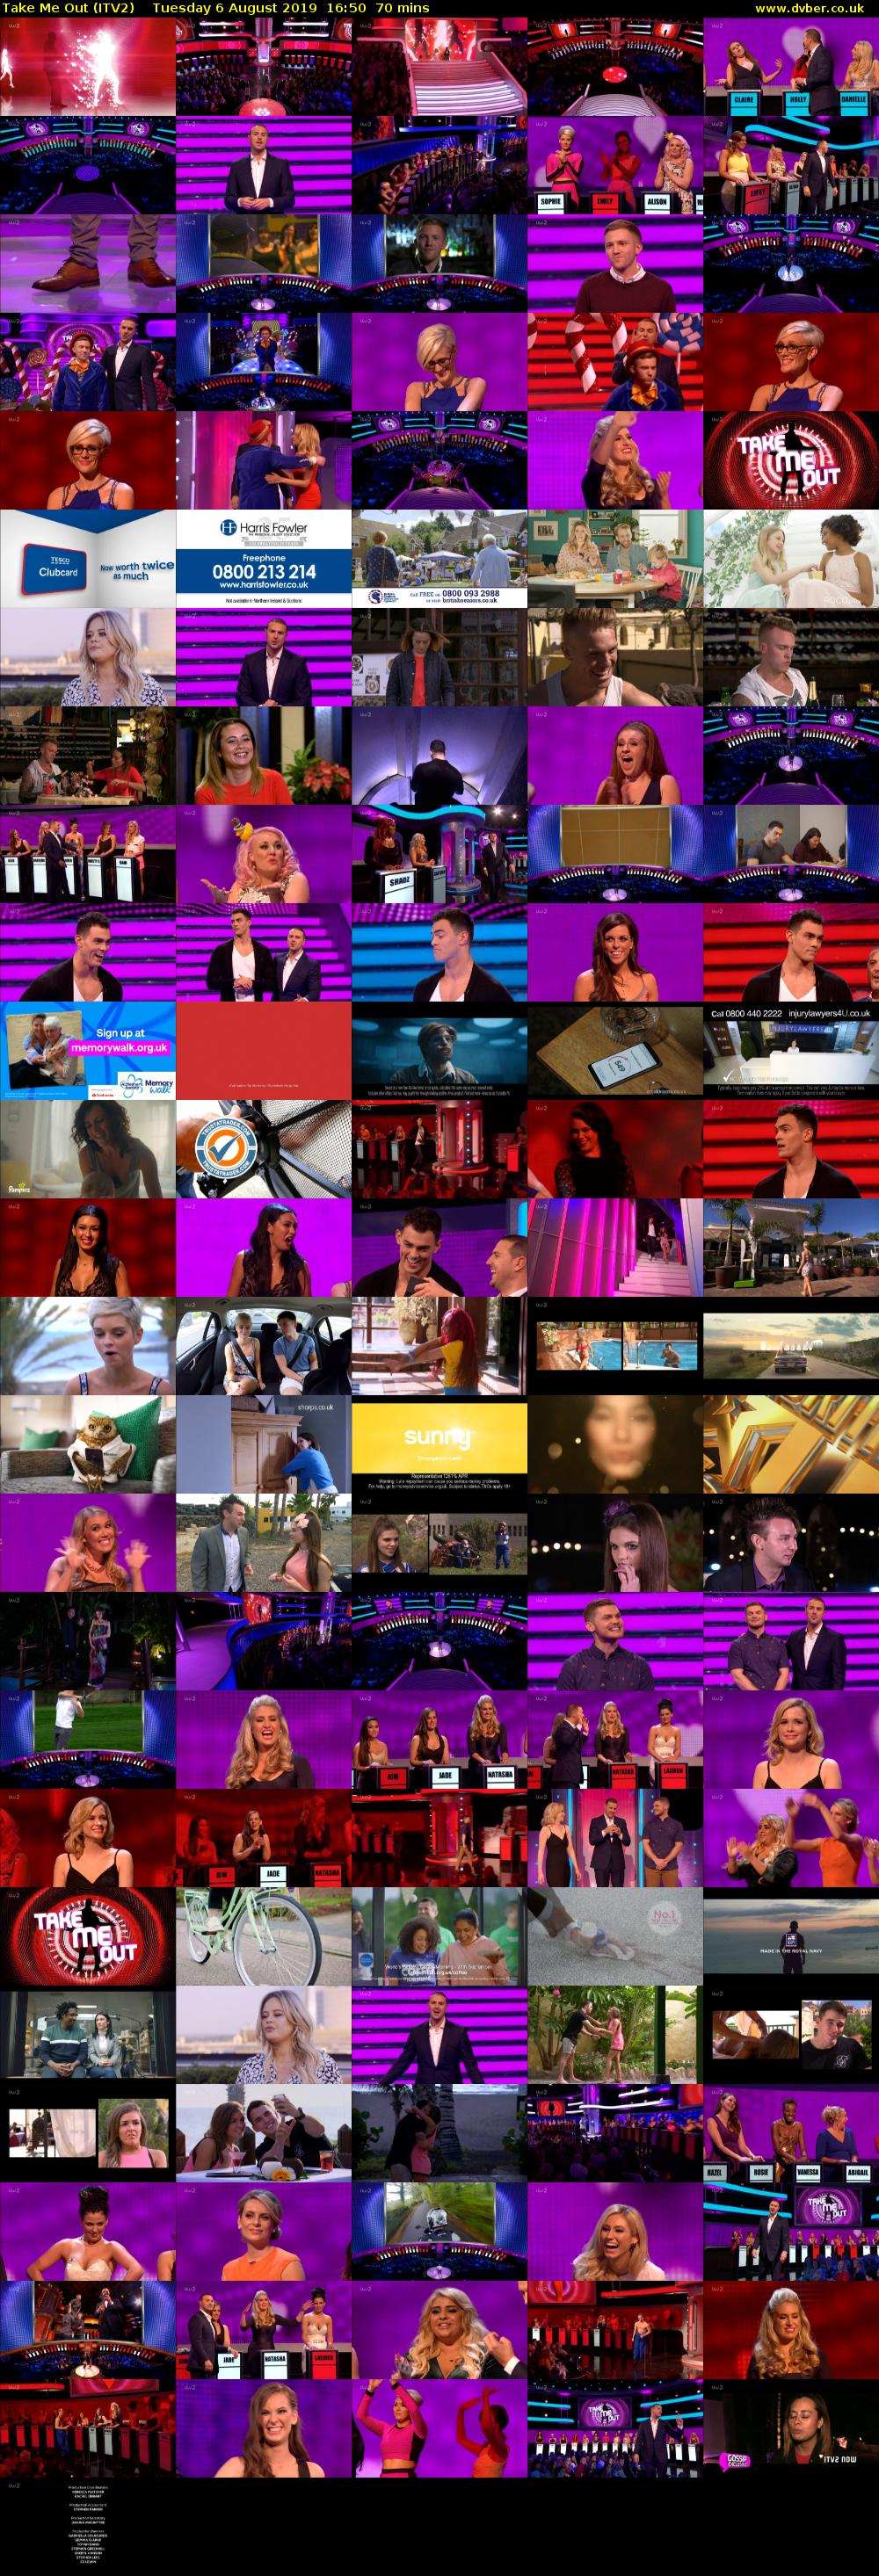 Take Me Out (ITV2) Tuesday 6 August 2019 16:50 - 18:00